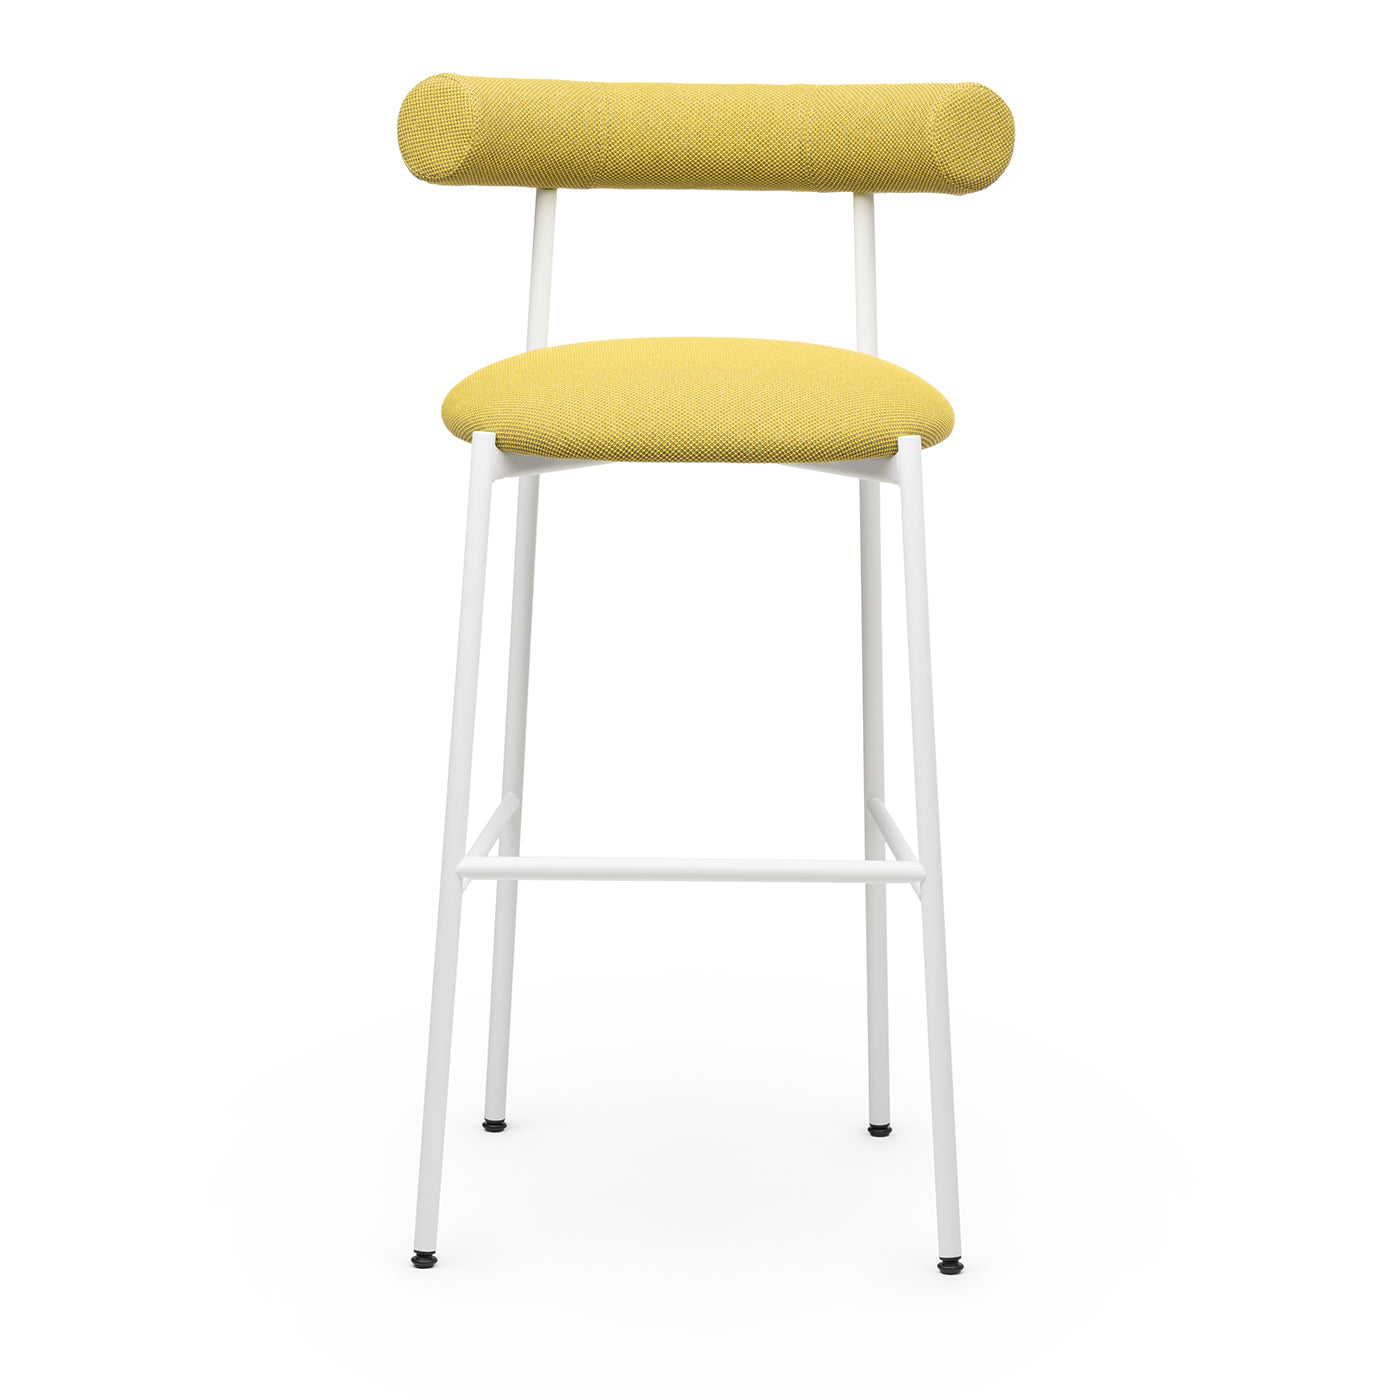 Pampa SG-80 Lime-Green & White Stool by Studio Pastina - Alternative view 1